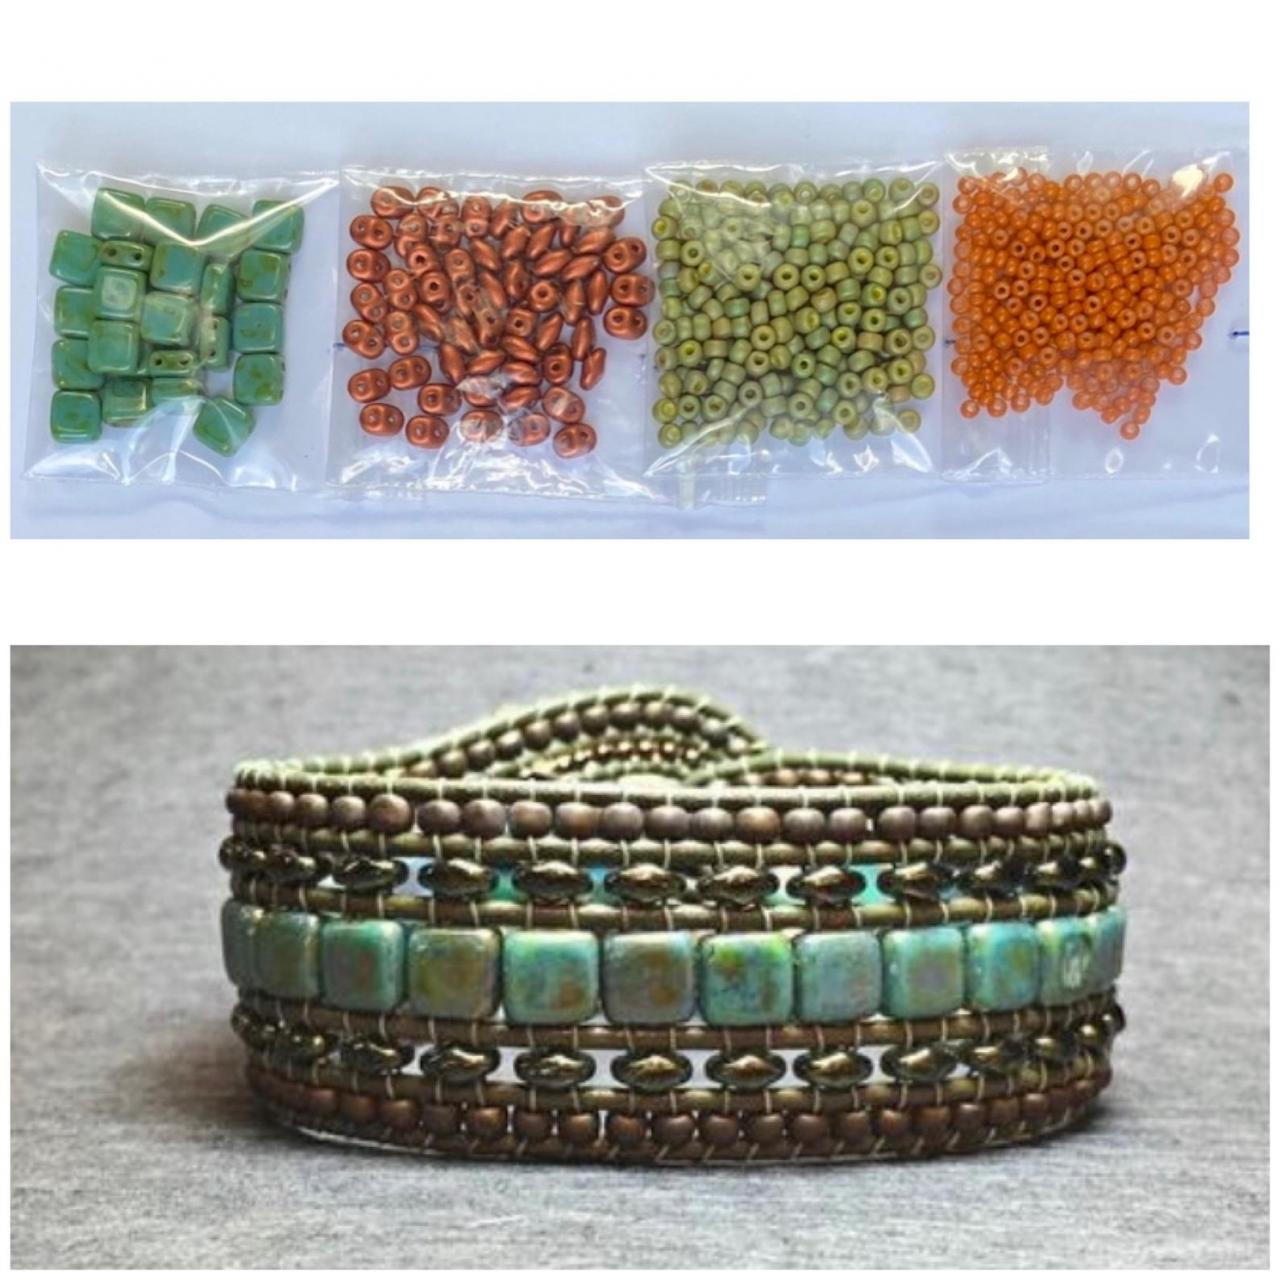 Kit Wide Leather Beaded Cuff Kit By Leila Martin Bonny Bohemian Orange Green Diy Intermediate Instructions Complete No Tools #7